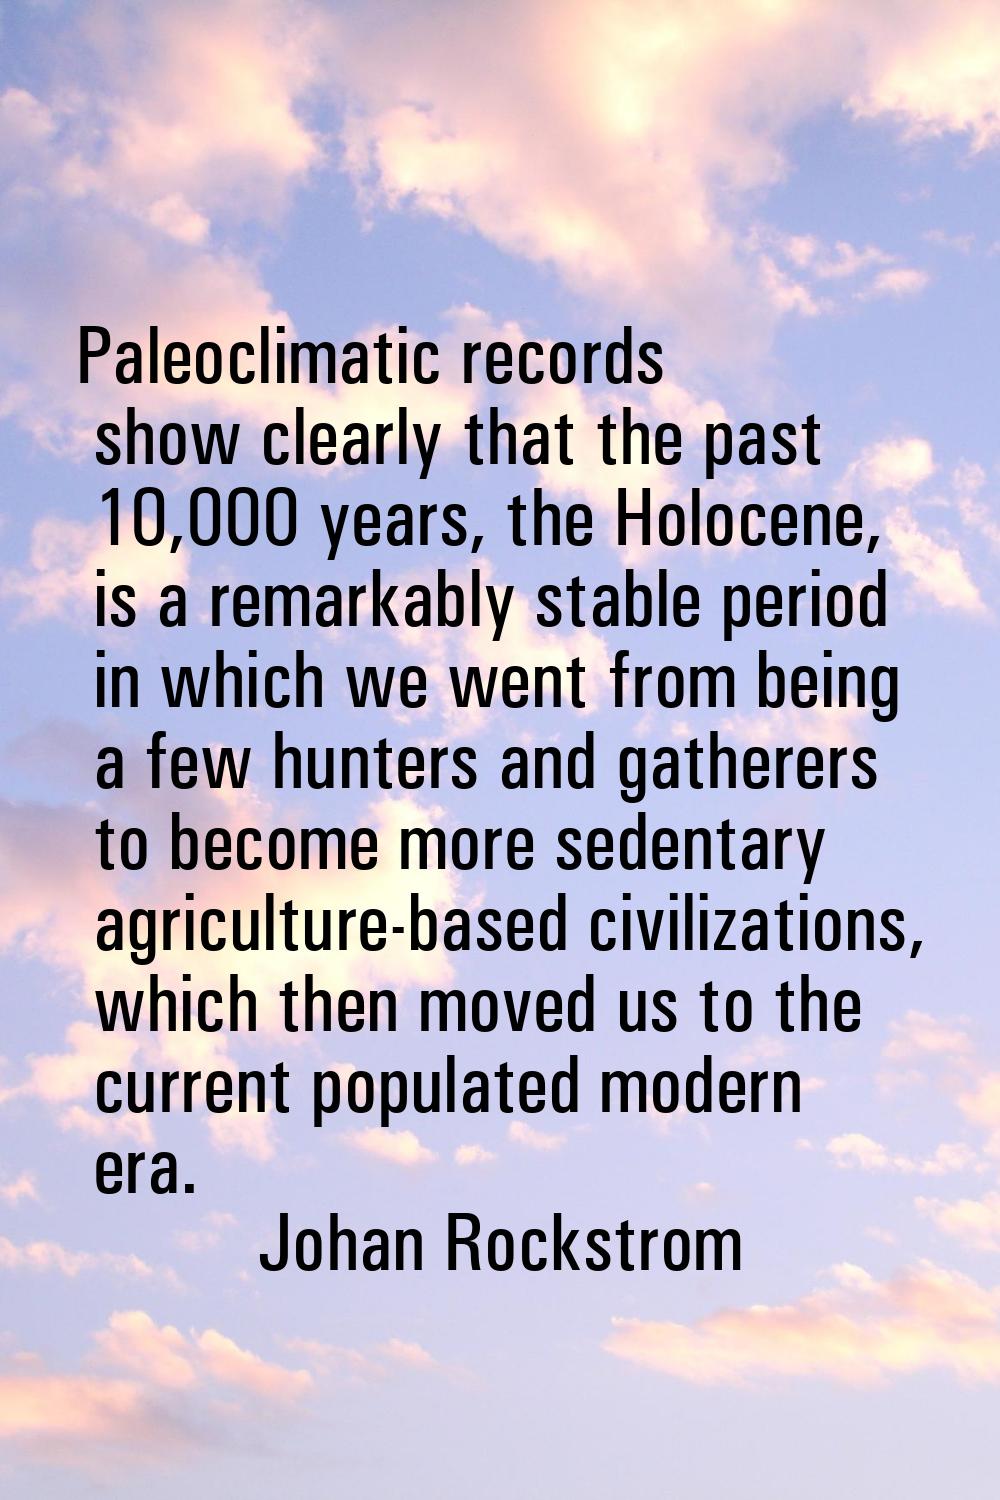 Paleoclimatic records show clearly that the past 10,000 years, the Holocene, is a remarkably stable